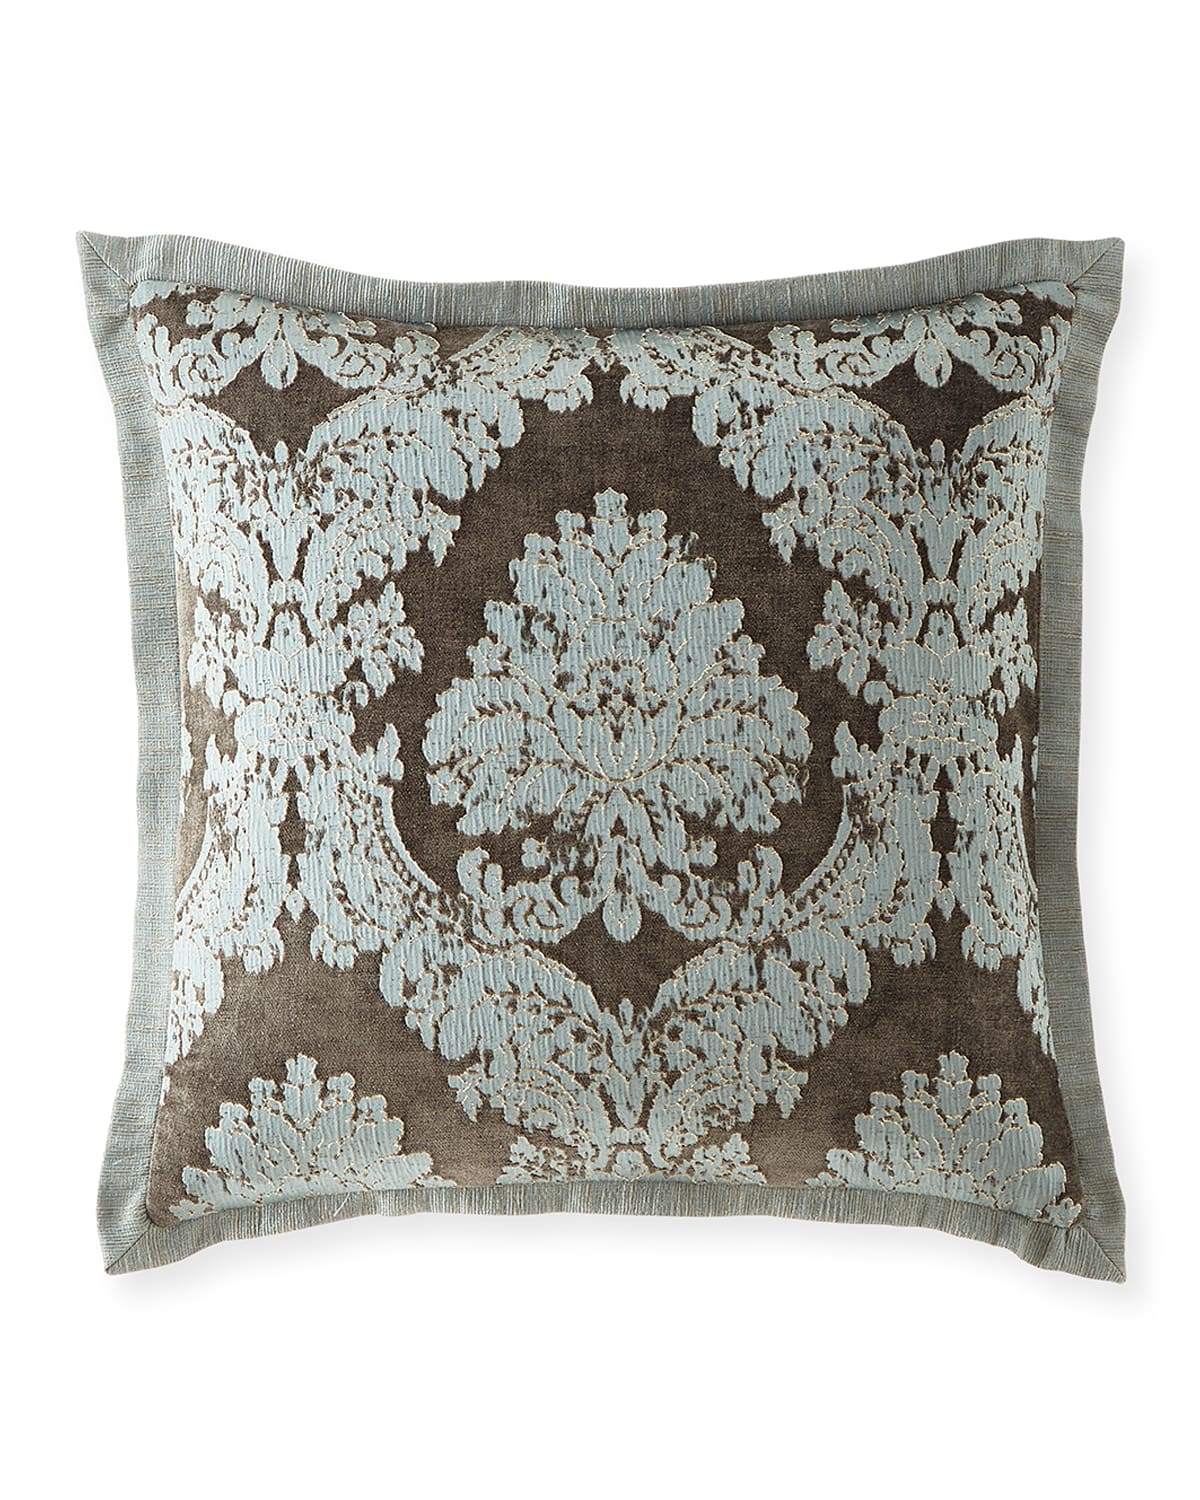 Shop Austin Horn Collection Radiance Pillow, 20"sq. In Seamist Blue